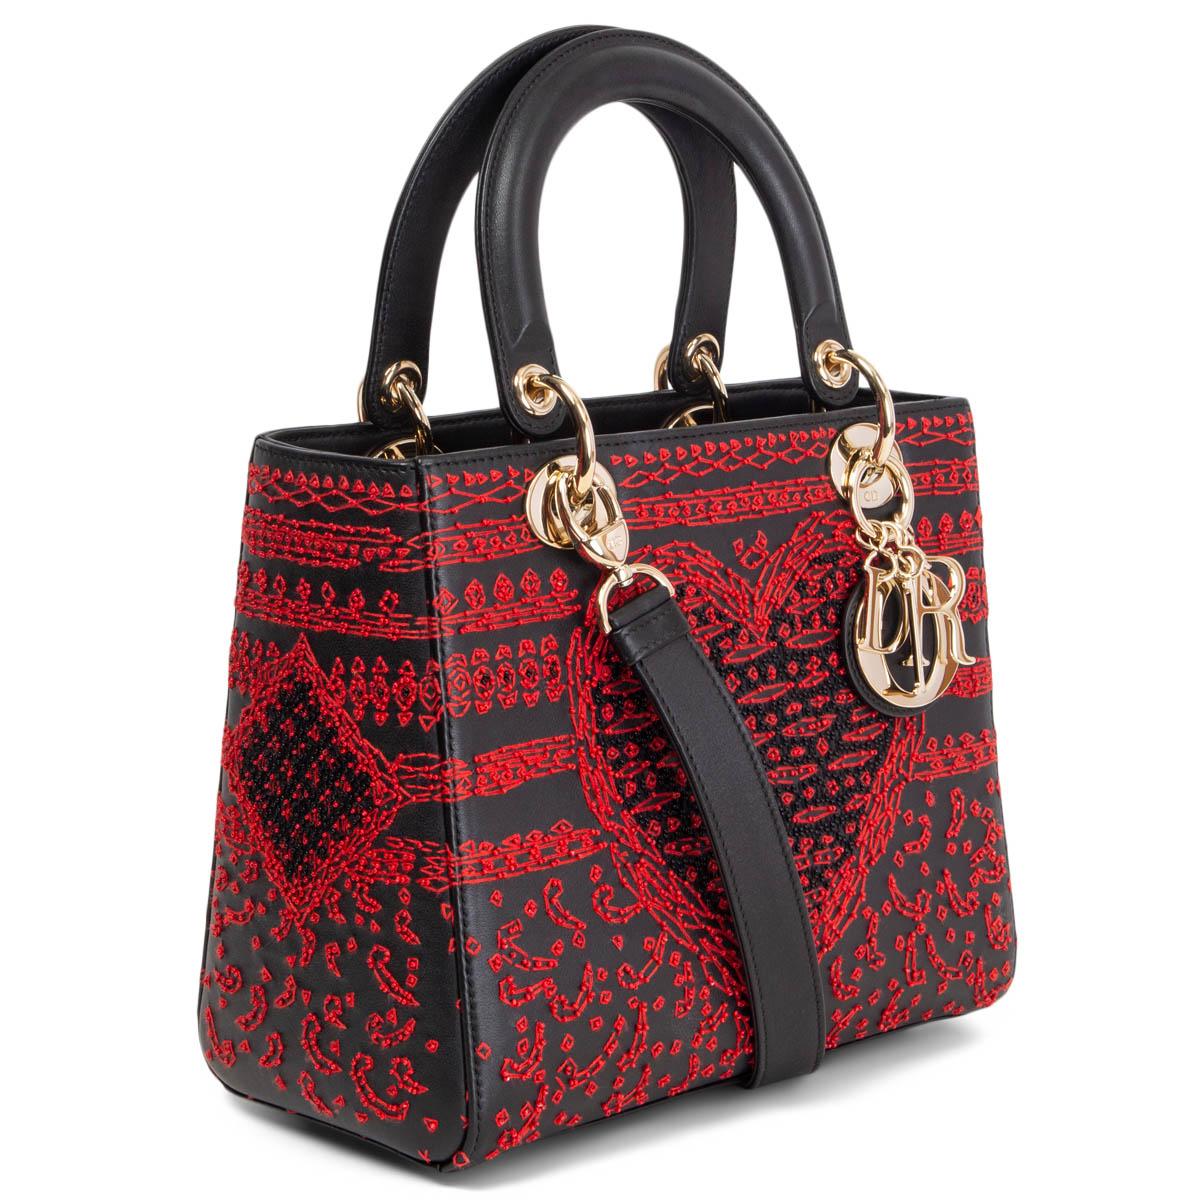 100% authentic Christian Dior Limited Edition Lady Dior shoulder bag in black calfskin embellished with red and black beads and heart & clover embroidery. The bag features light gold-tone hardware. Opens with a zipper on top and is lined in black